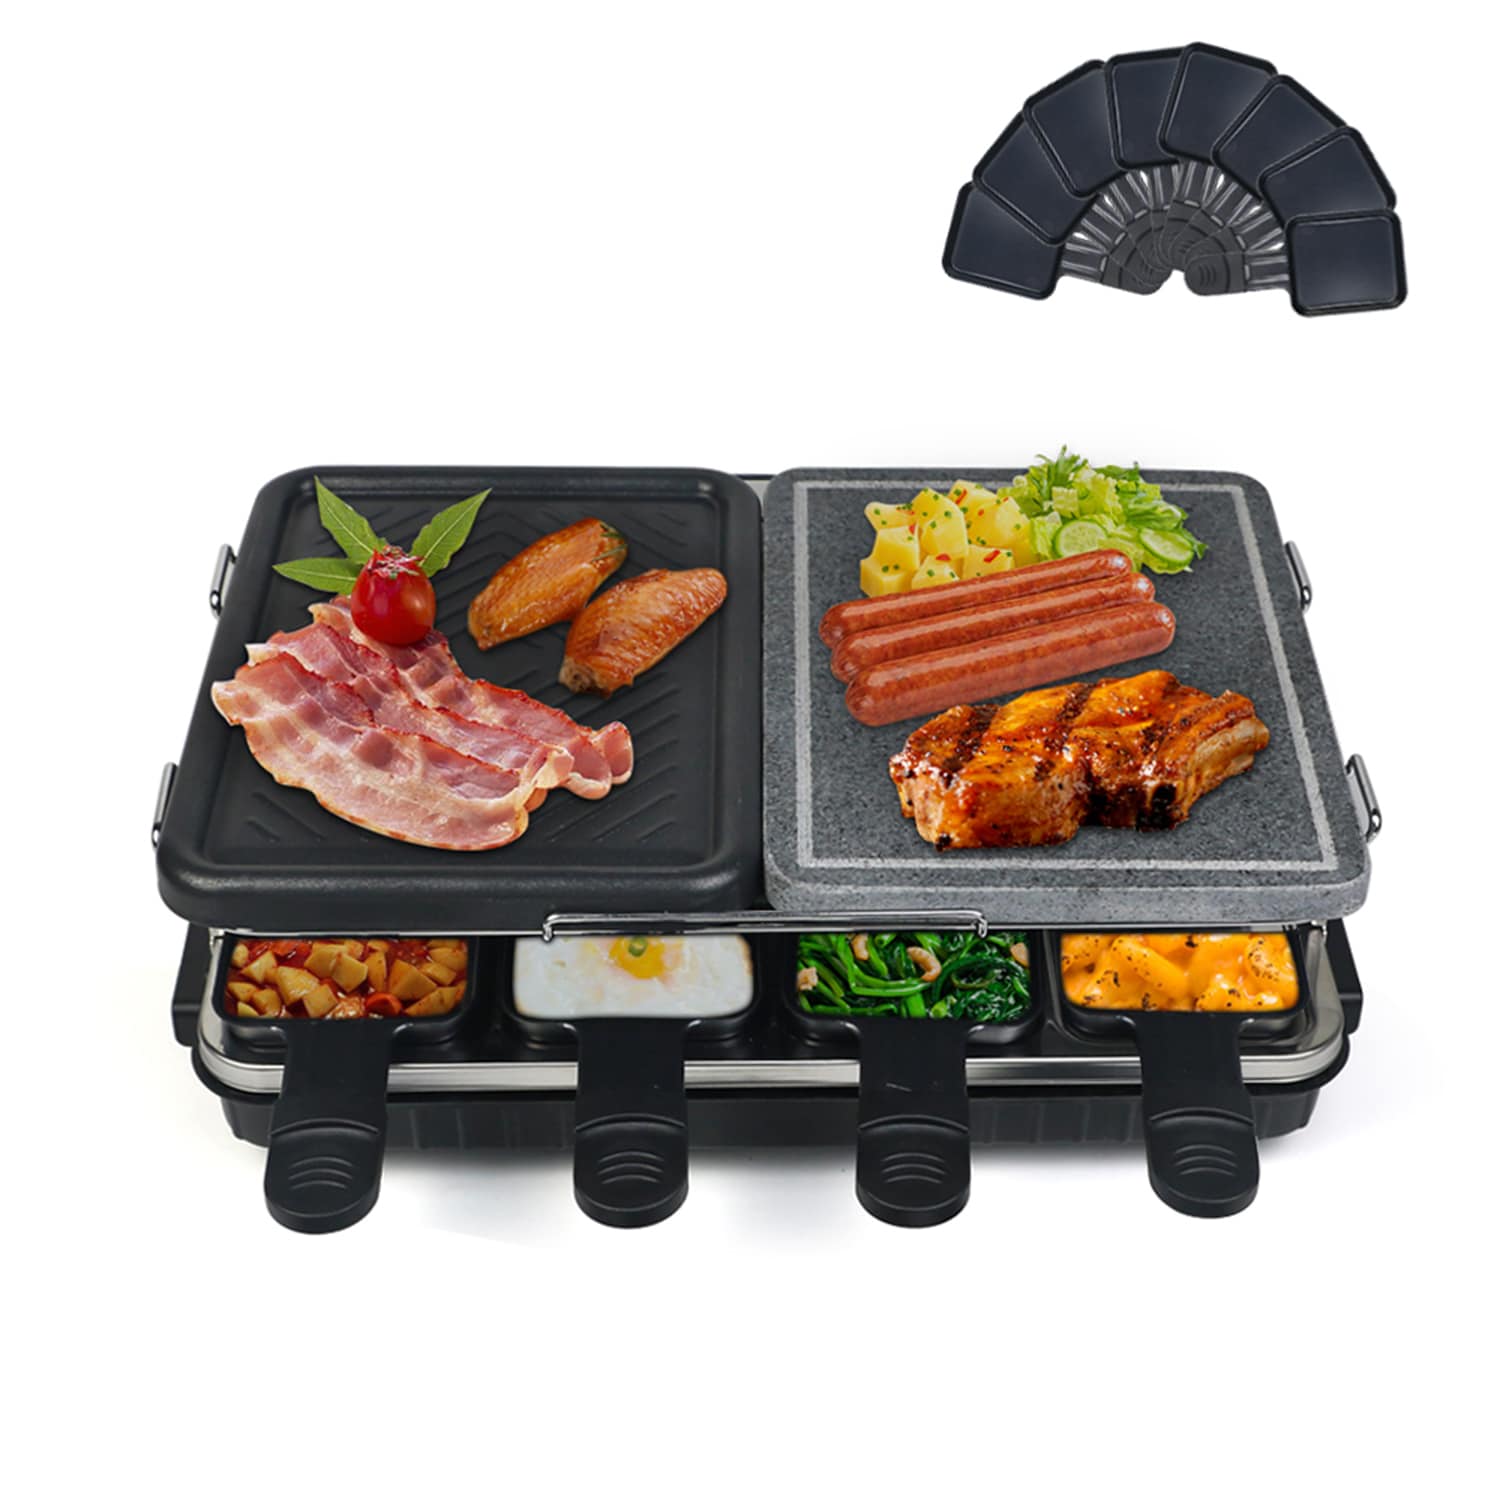 Bybafun 16.1-IN Grill Multi-Purpose Korean the BBQ Grills at Barbecue - Table with 1300W department Cooking and Top Electric for Non-Stick Plate in Electric Grill Stone Grill